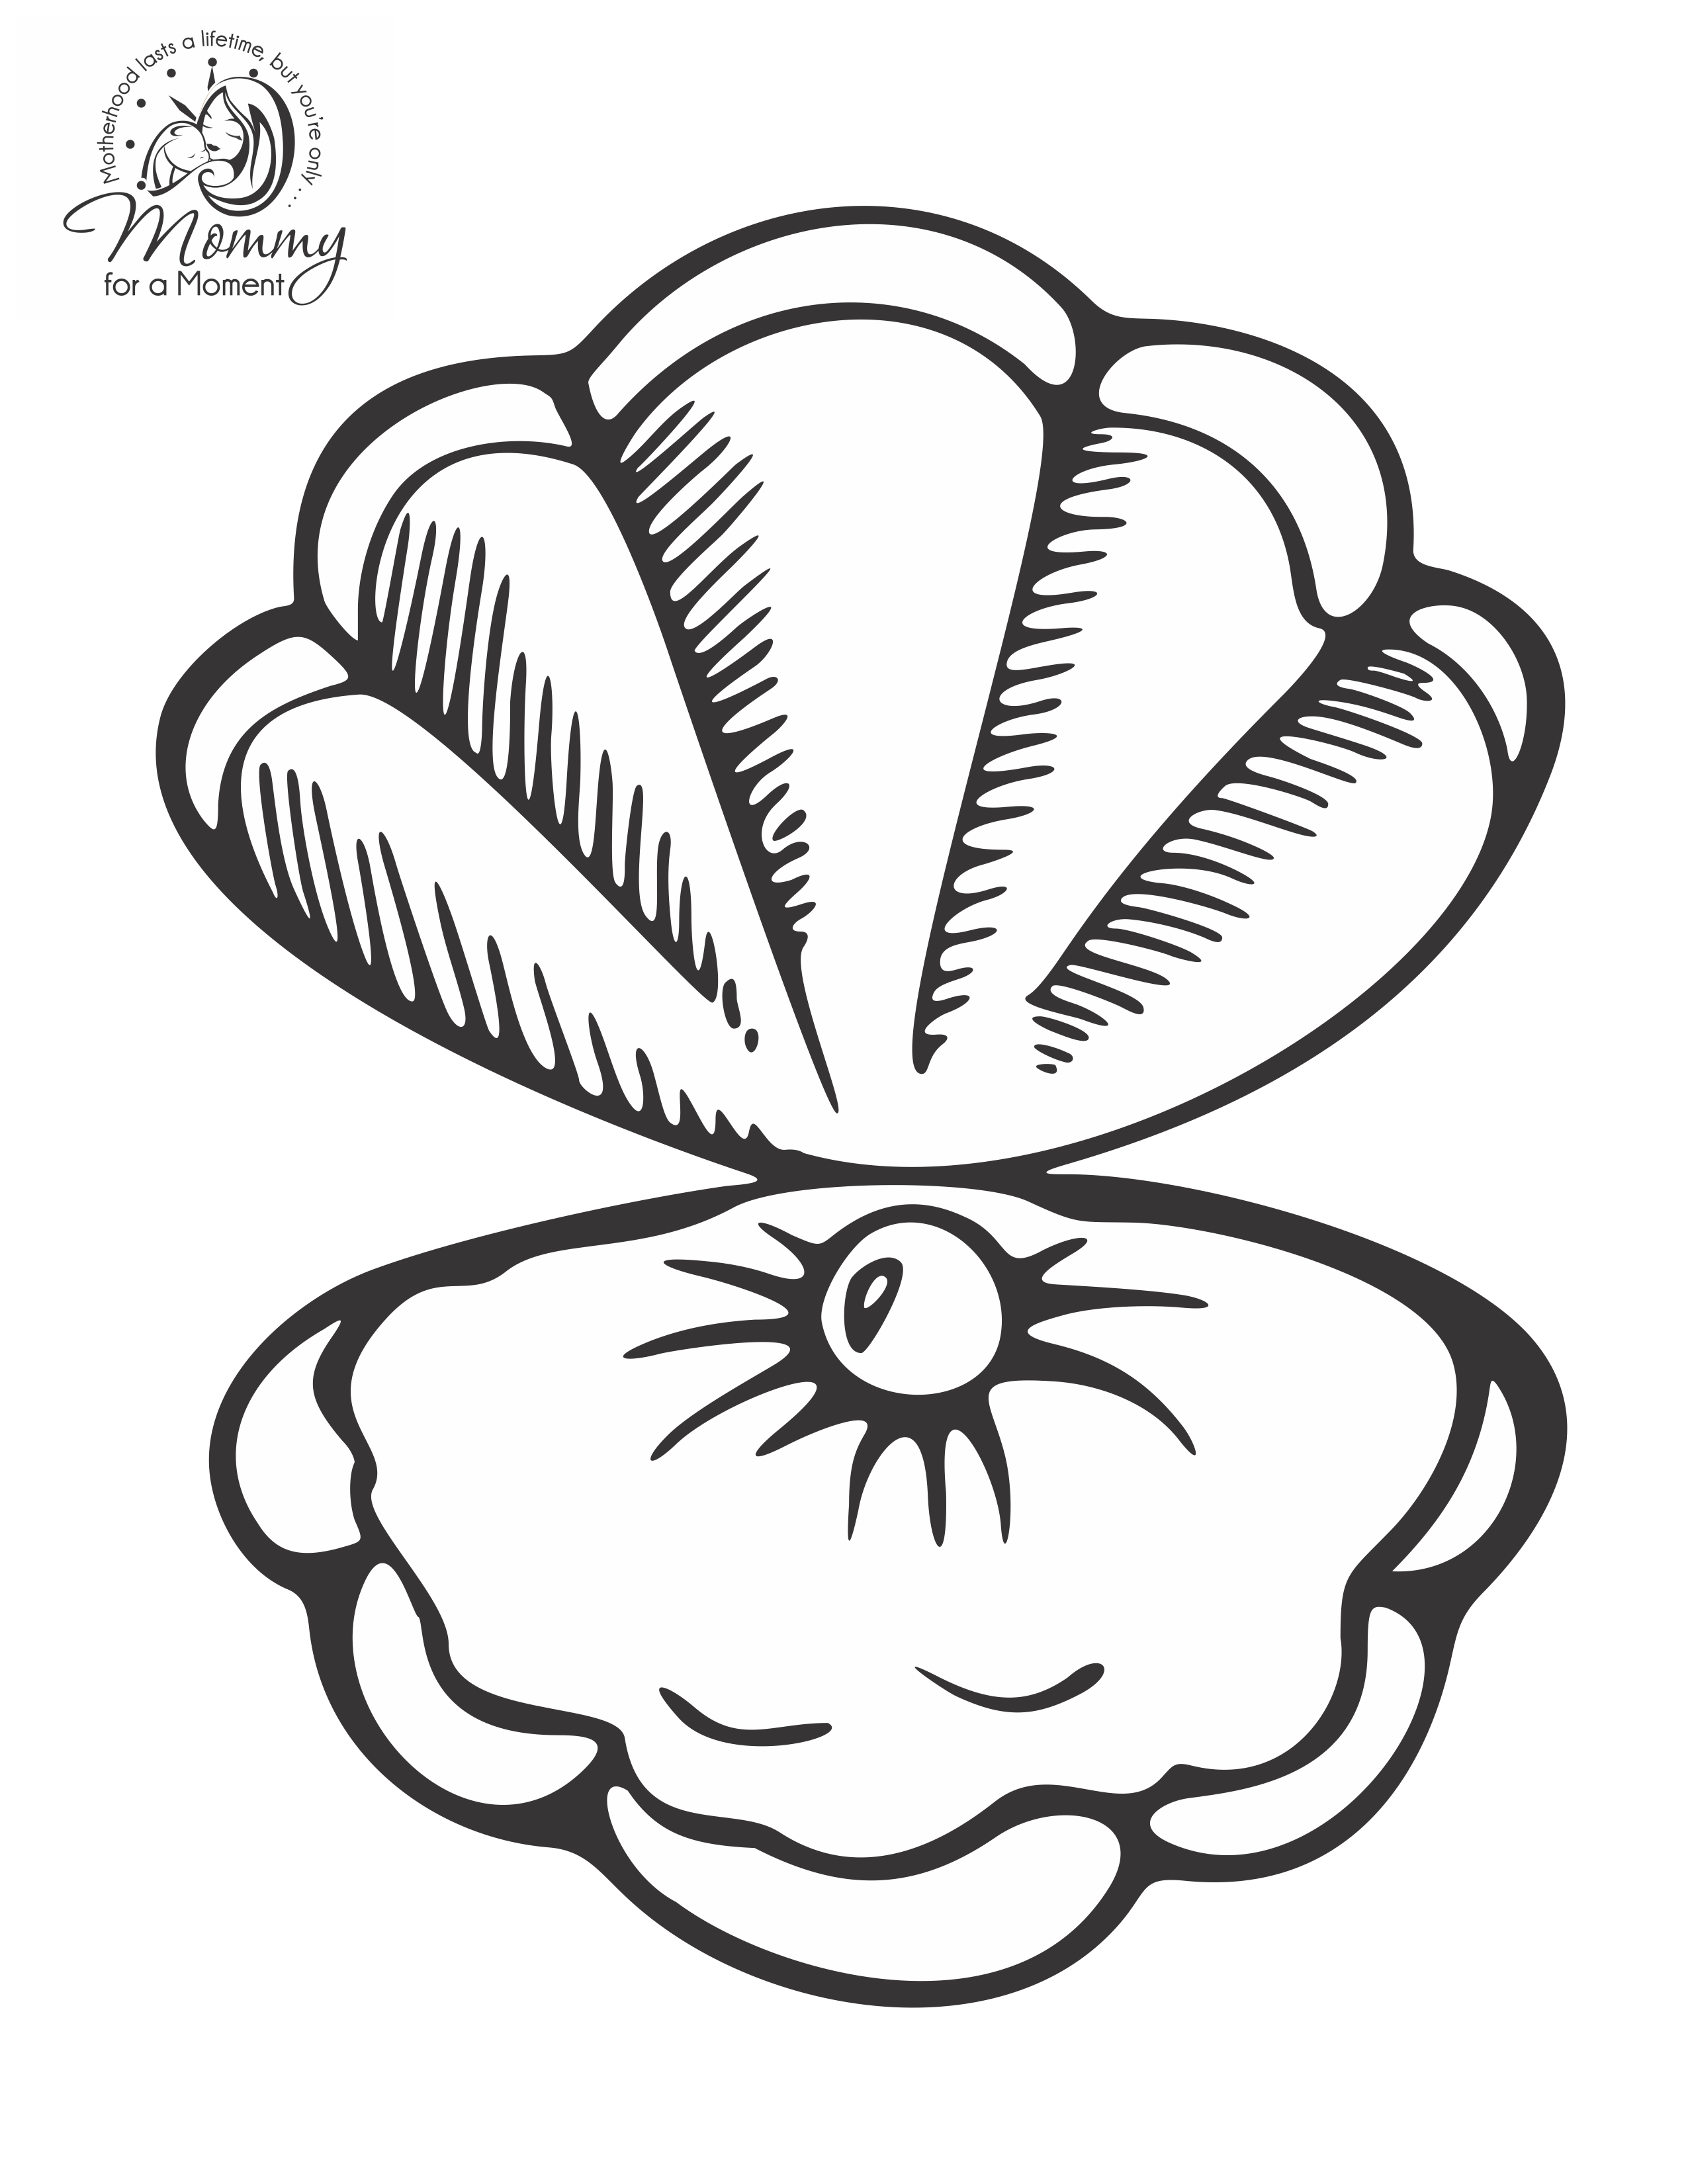 ariel sitting pretty oyster shell coloring page pictures id 73636 :  Uncategorized | Animal coloring pages, Shopkins colouring pages, Spring coloring  pages